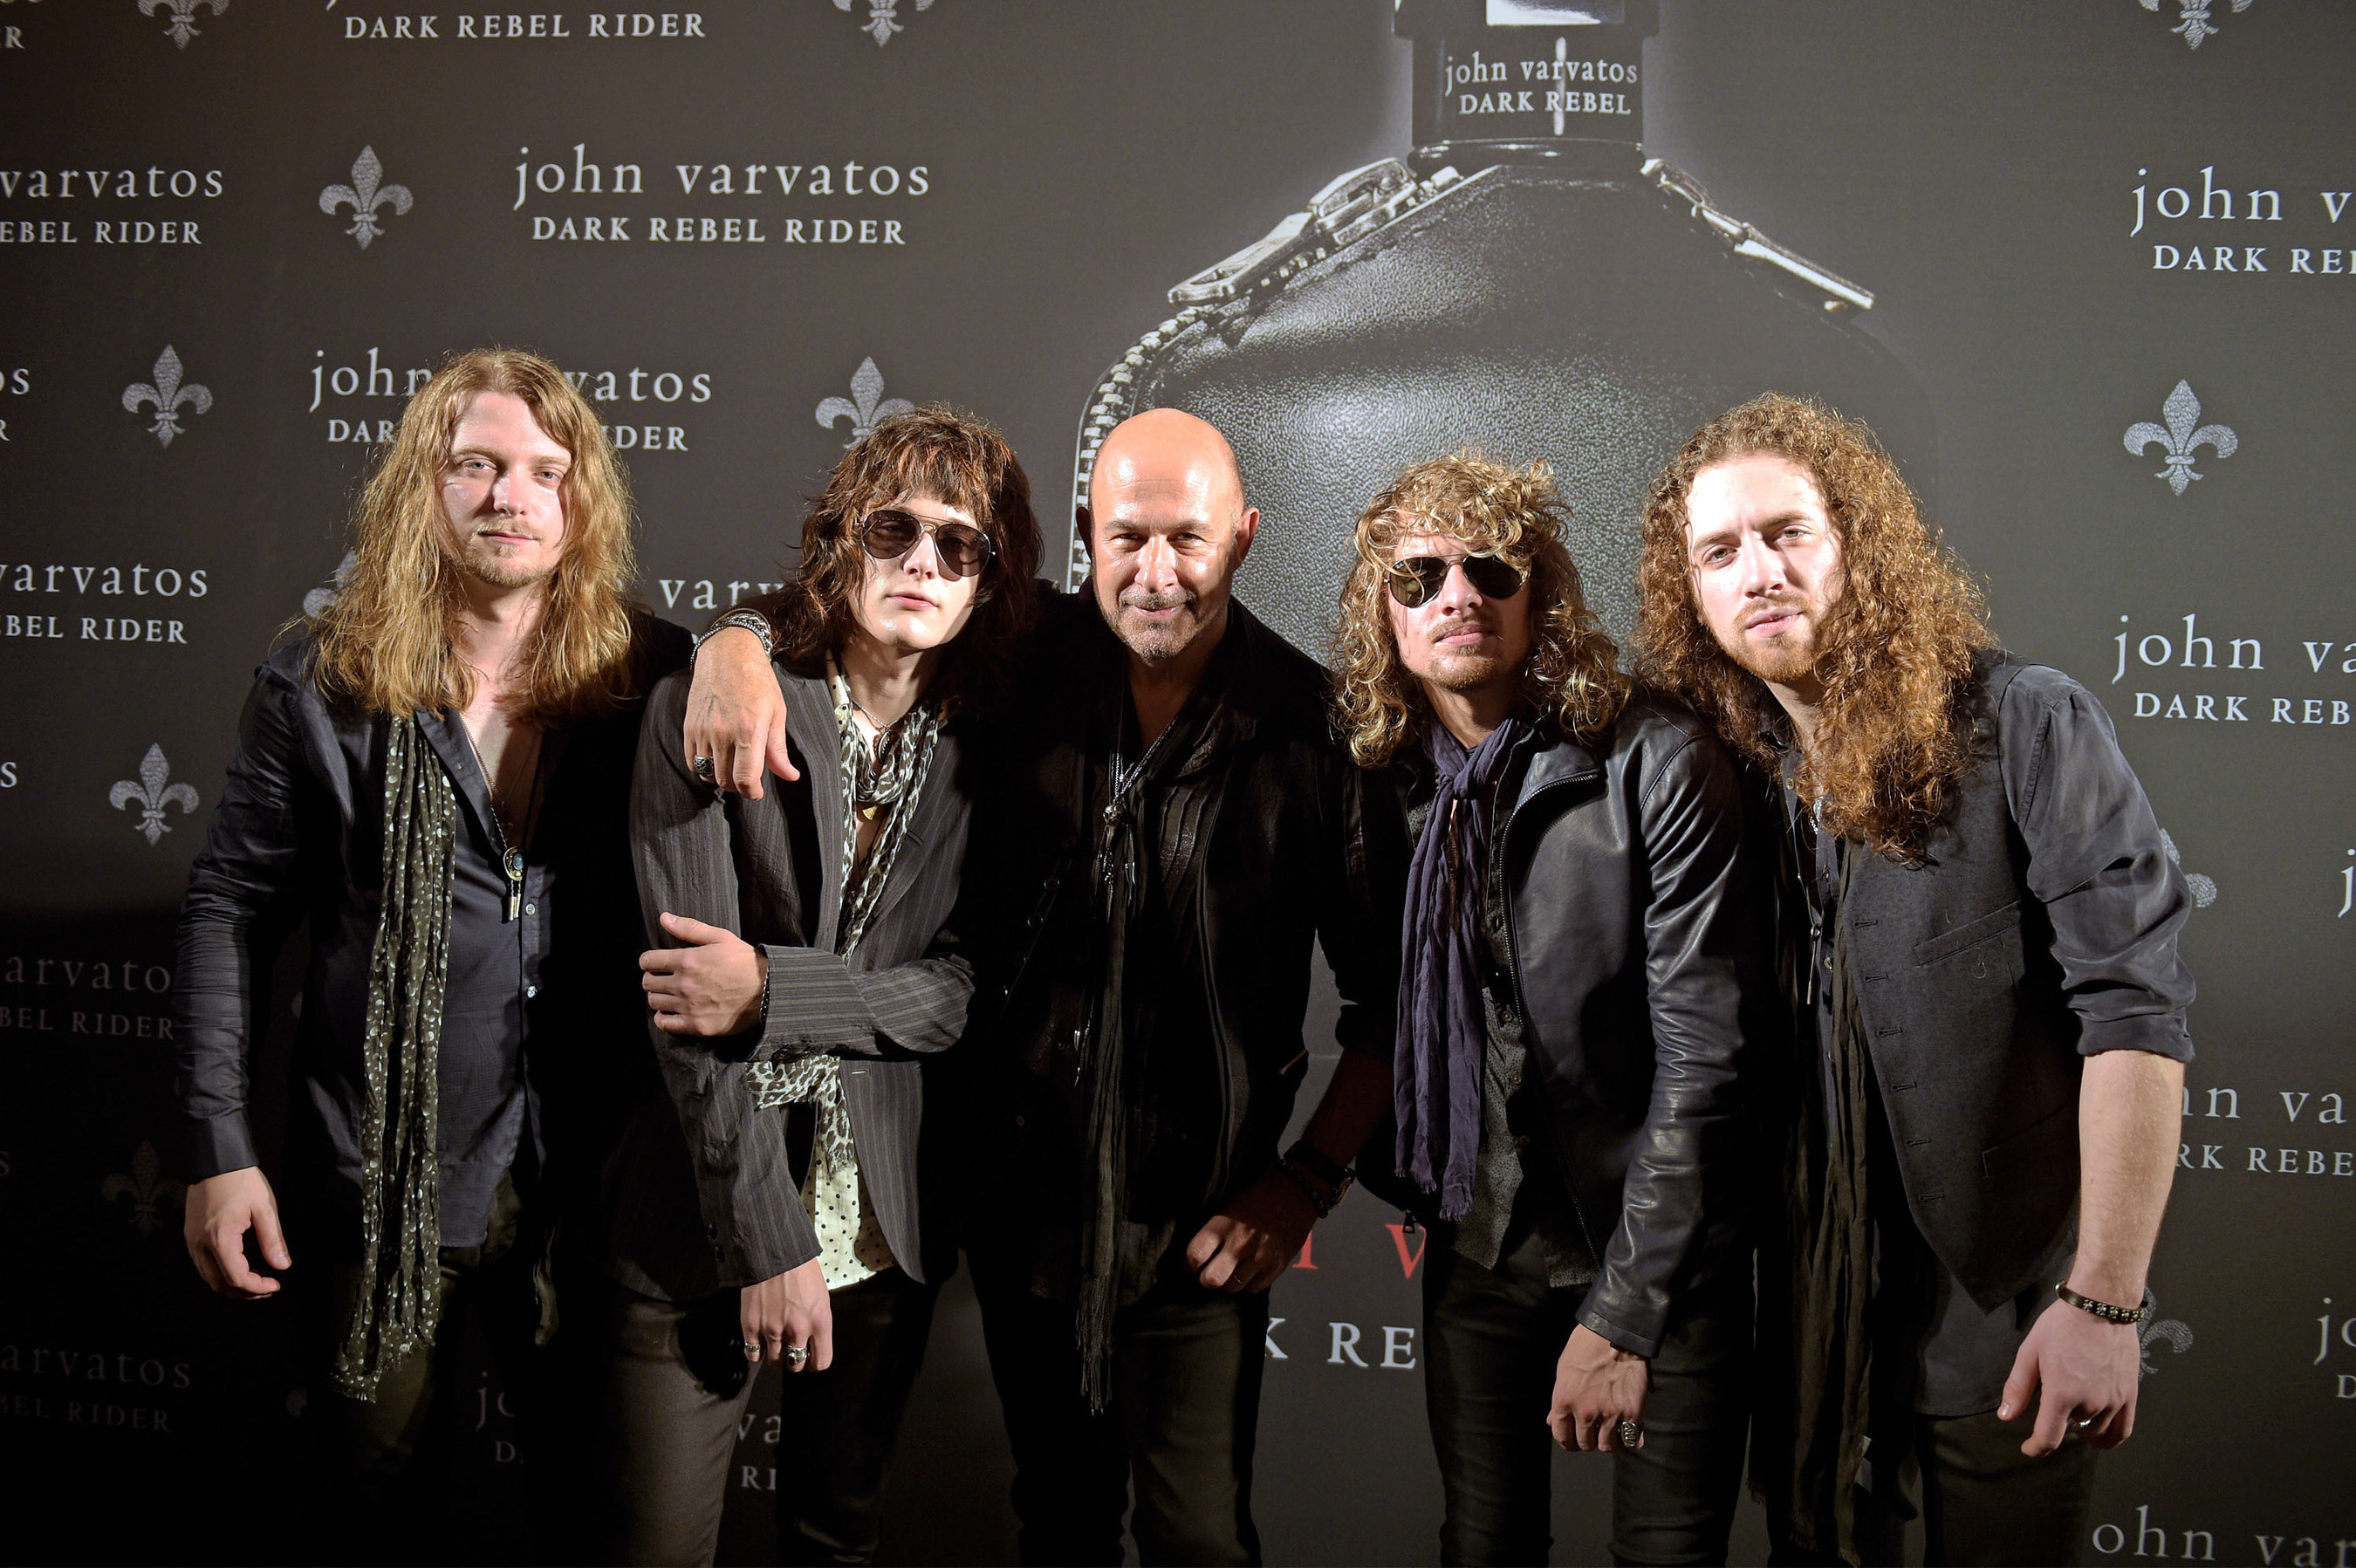 John Varvatos Spring/Summer 2017 Fashion Show After Party Celebrating The  Launch Of The New Dark Rebel Rider Fragrance